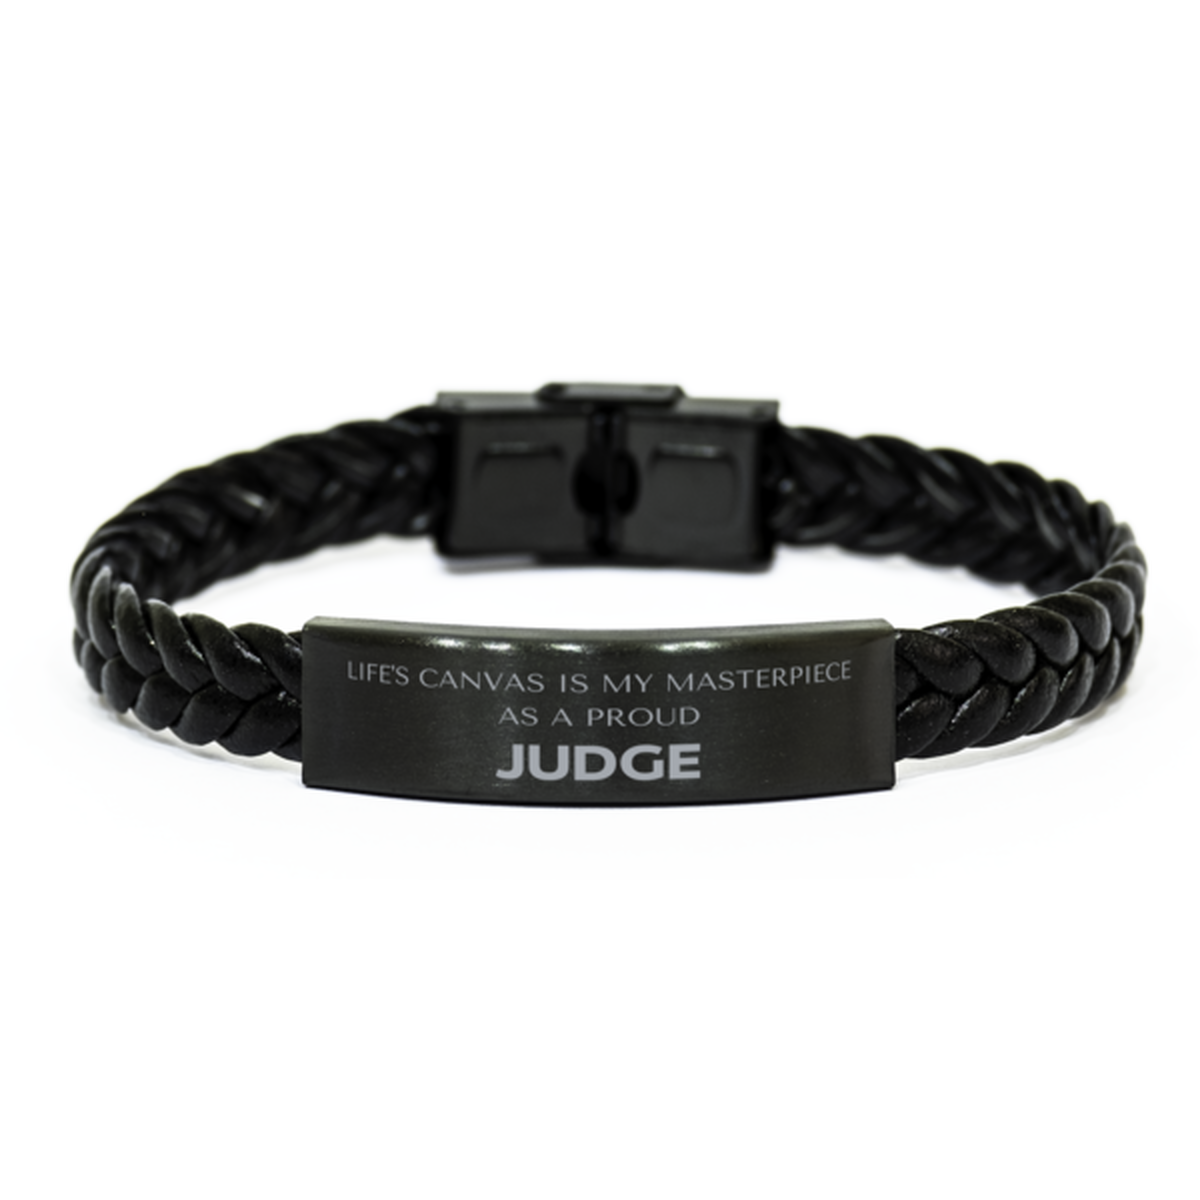 Proud Judge Gifts, Life's canvas is my masterpiece, Epic Birthday Christmas Unique Braided Leather Bracelet For Judge, Coworkers, Men, Women, Friends